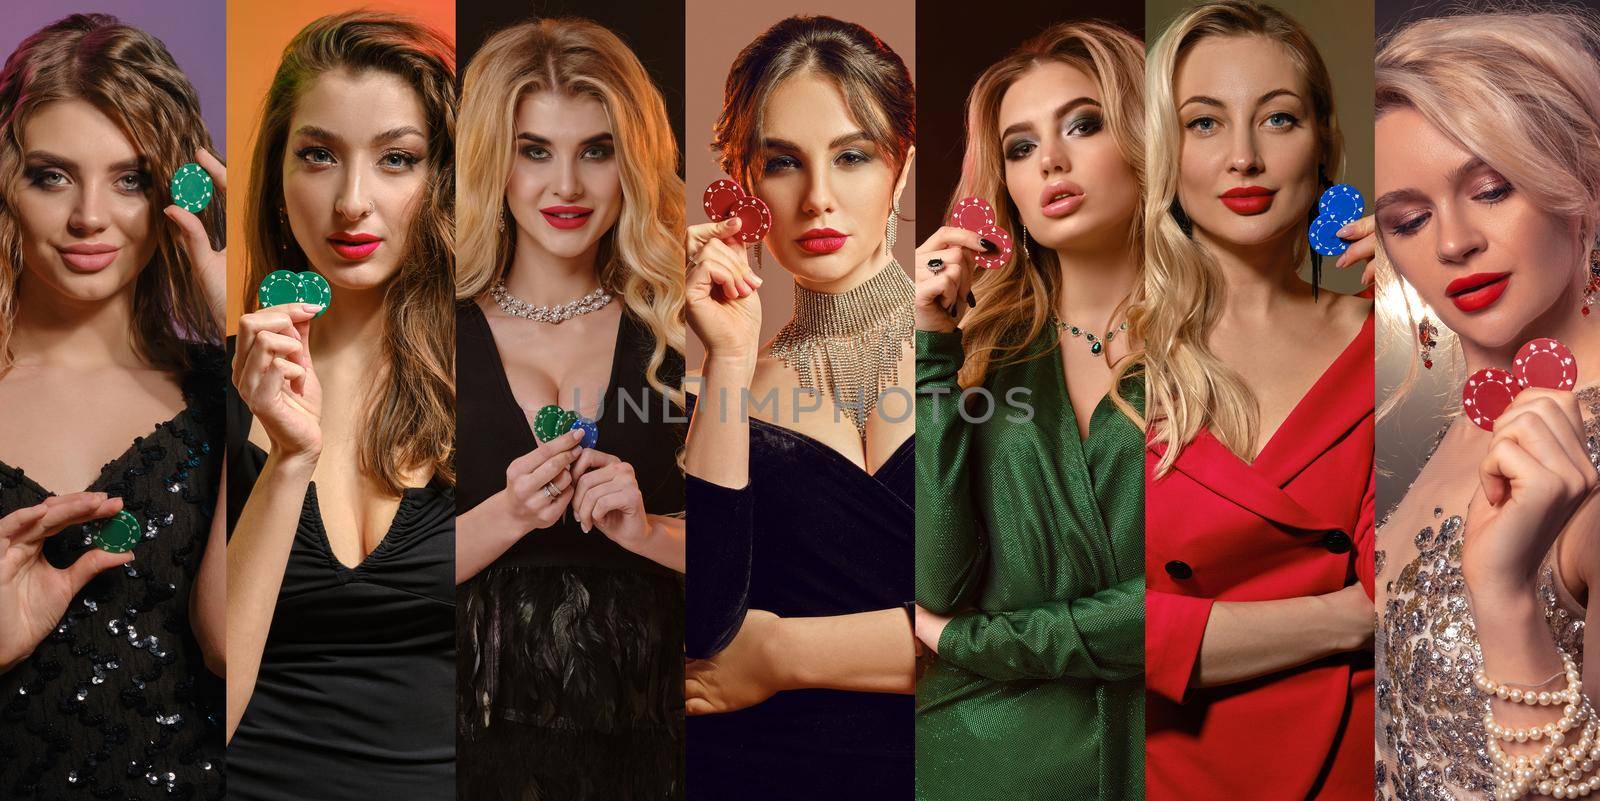 Collage of gorgeous women with bright make-up and hairstyles, in stylish dresses and jewelry. They showing playing chips while posing against colorful backgrounds. Gambling, poker, casino. Close-up